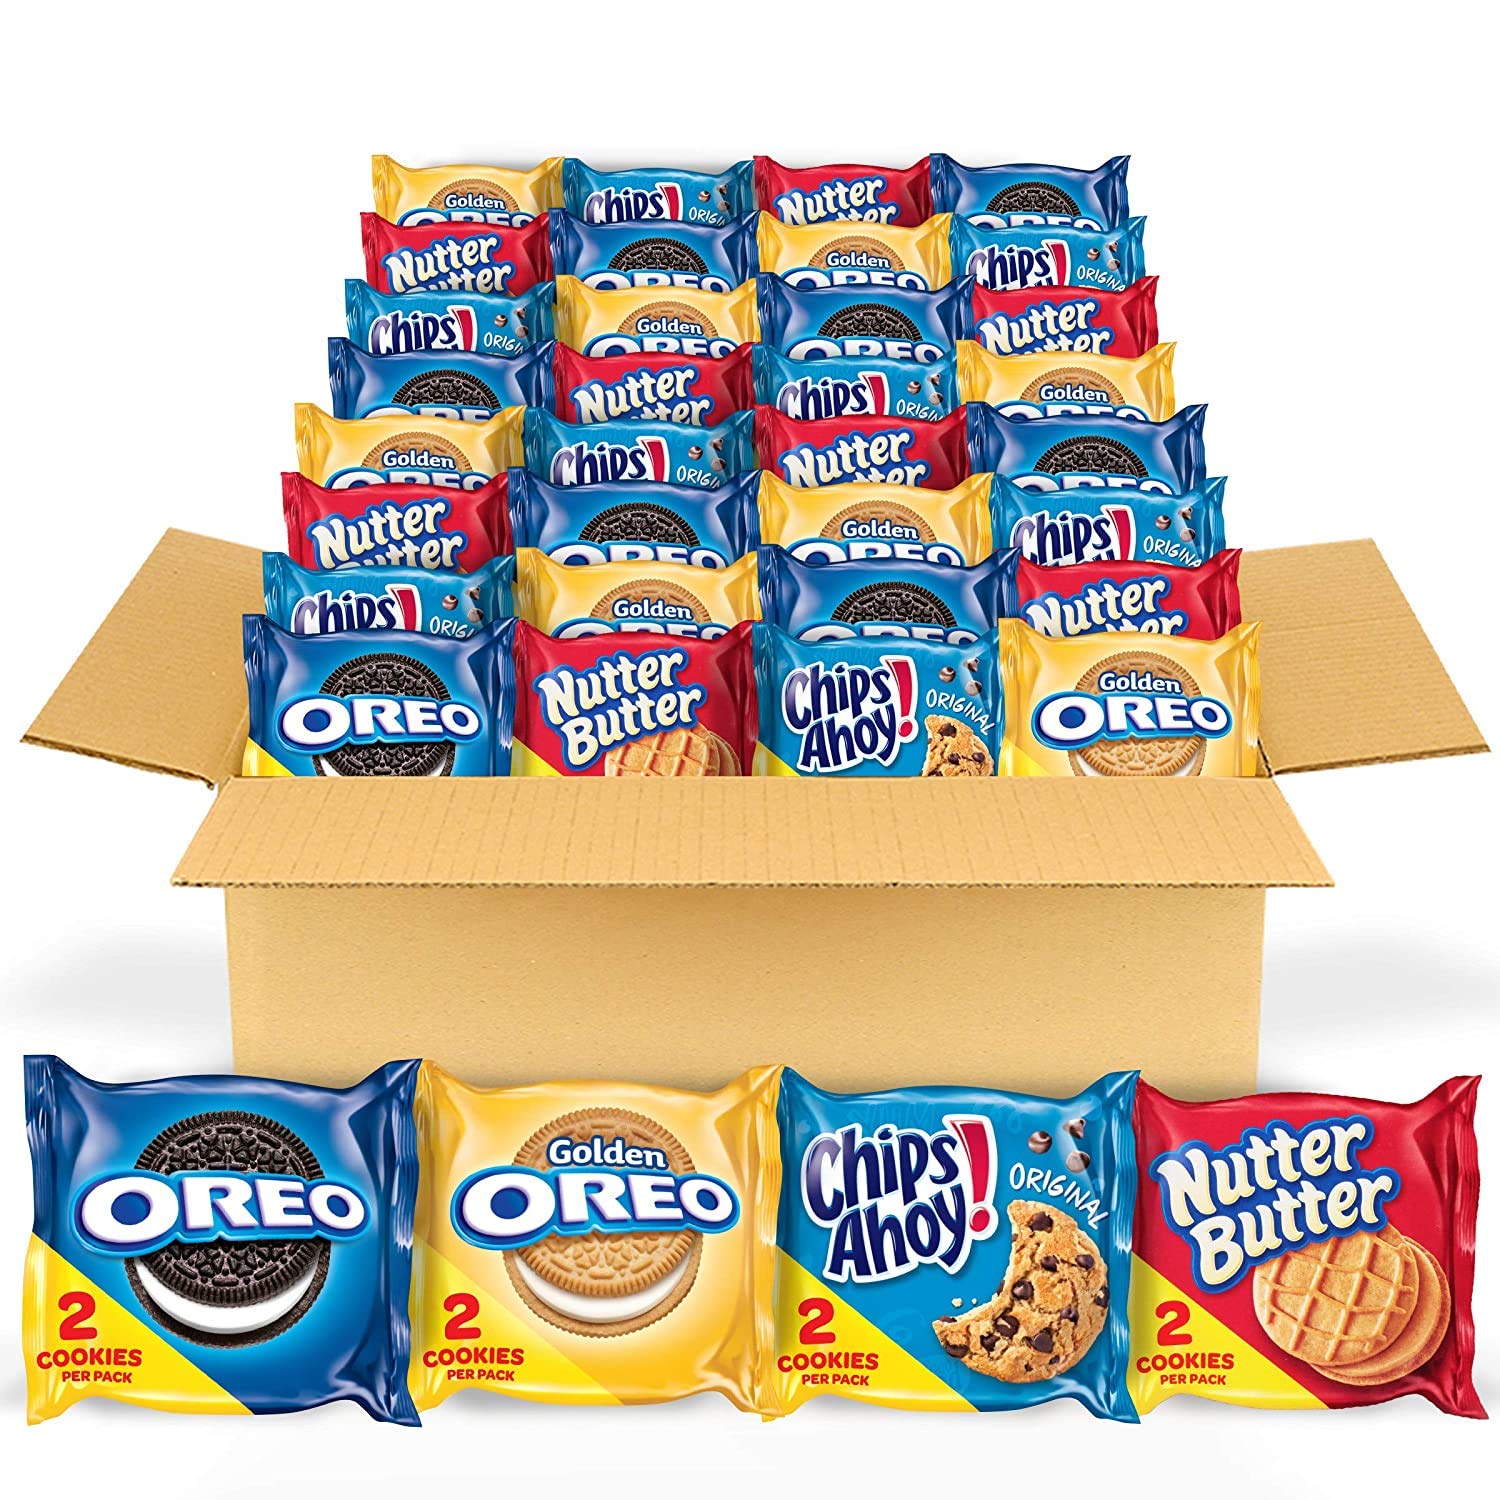 $15.80 /w S&S: OREO Original, OREO Golden, CHIPS AHOY!, 56 Snack Packs (2 Cookies Per Pack)